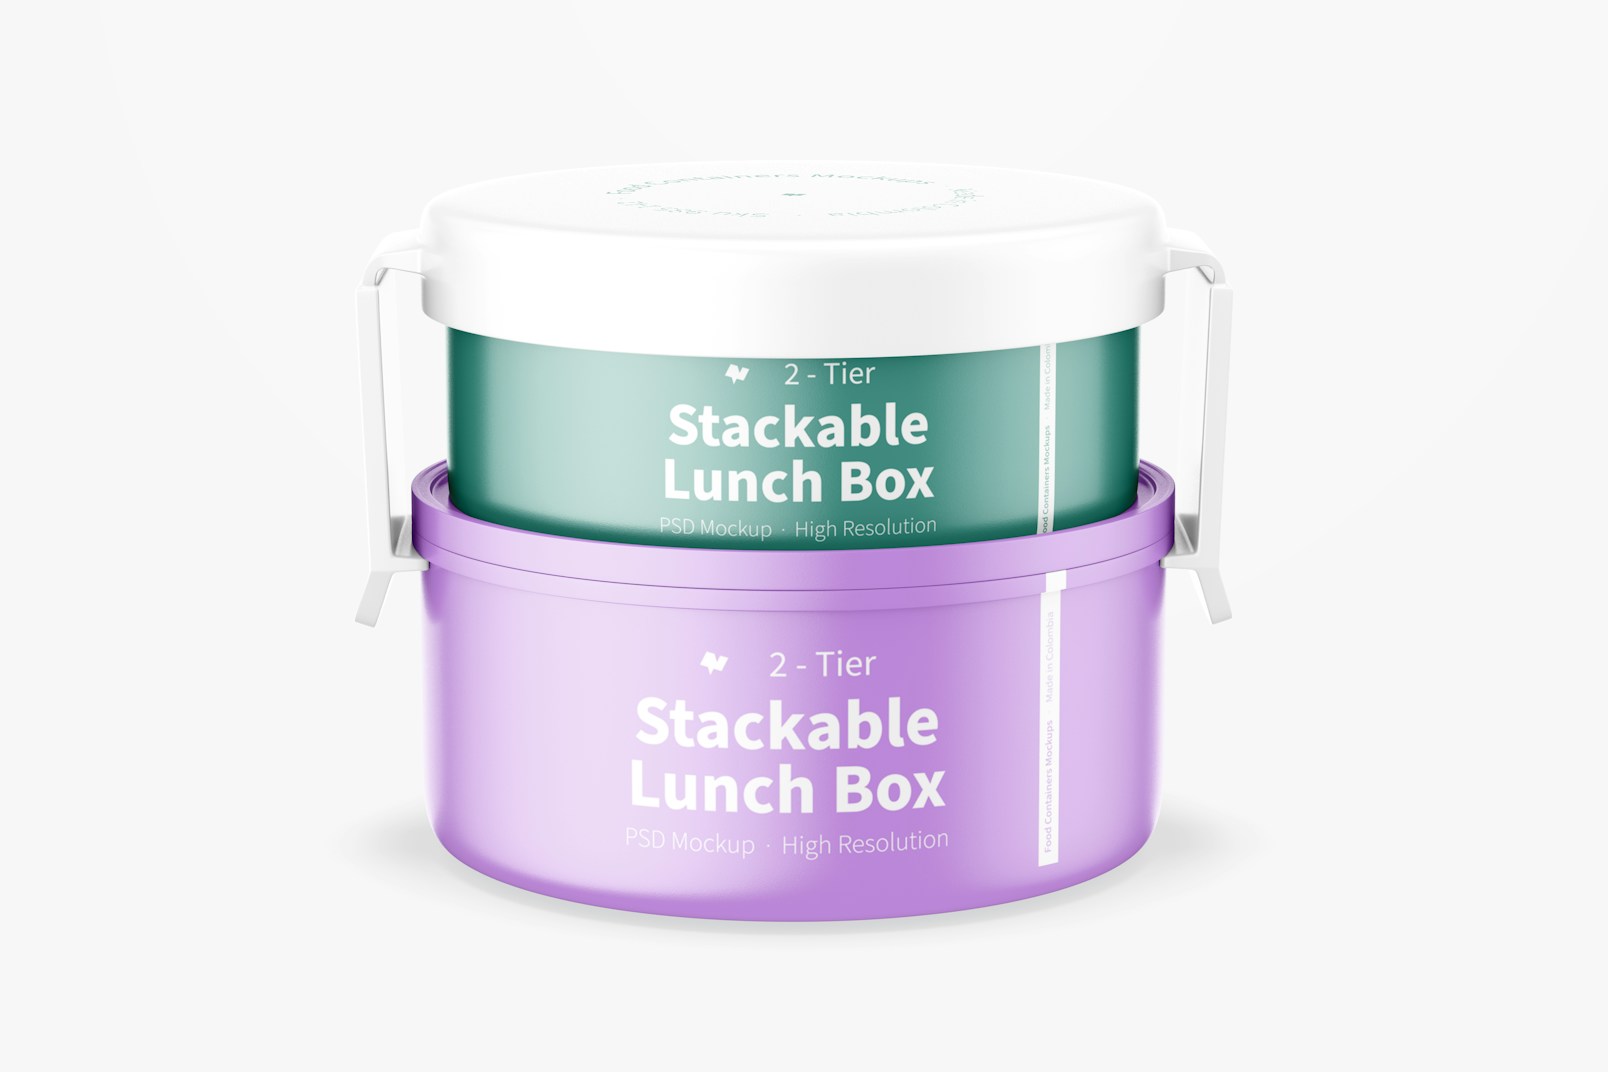 2-Tier Stackable Lunch Box Mockup, Front View